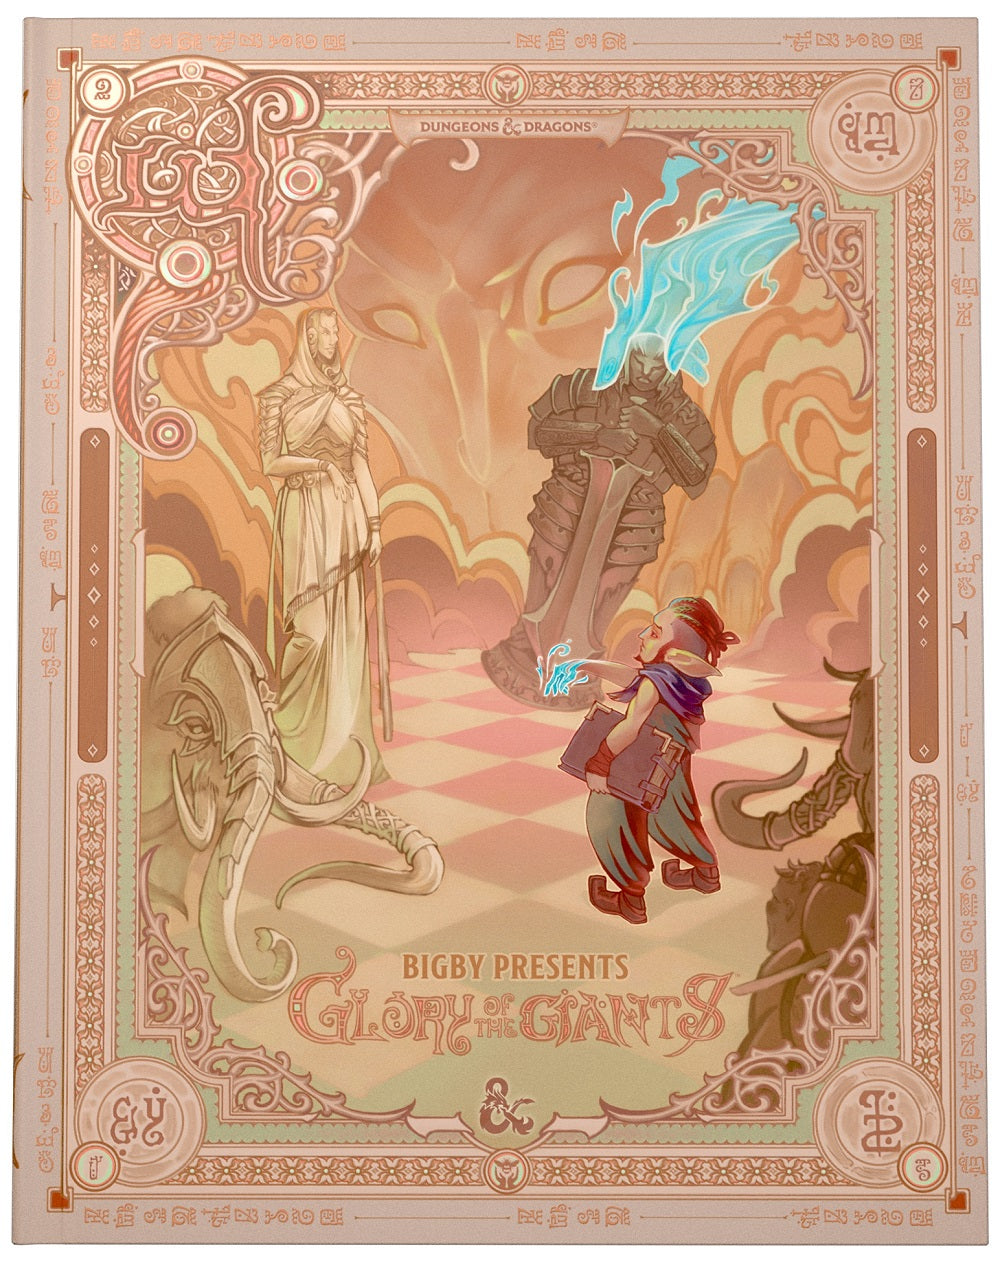 Dungeons & Dragons: Bigby Presents - Glory of the Giants Alternate Cover